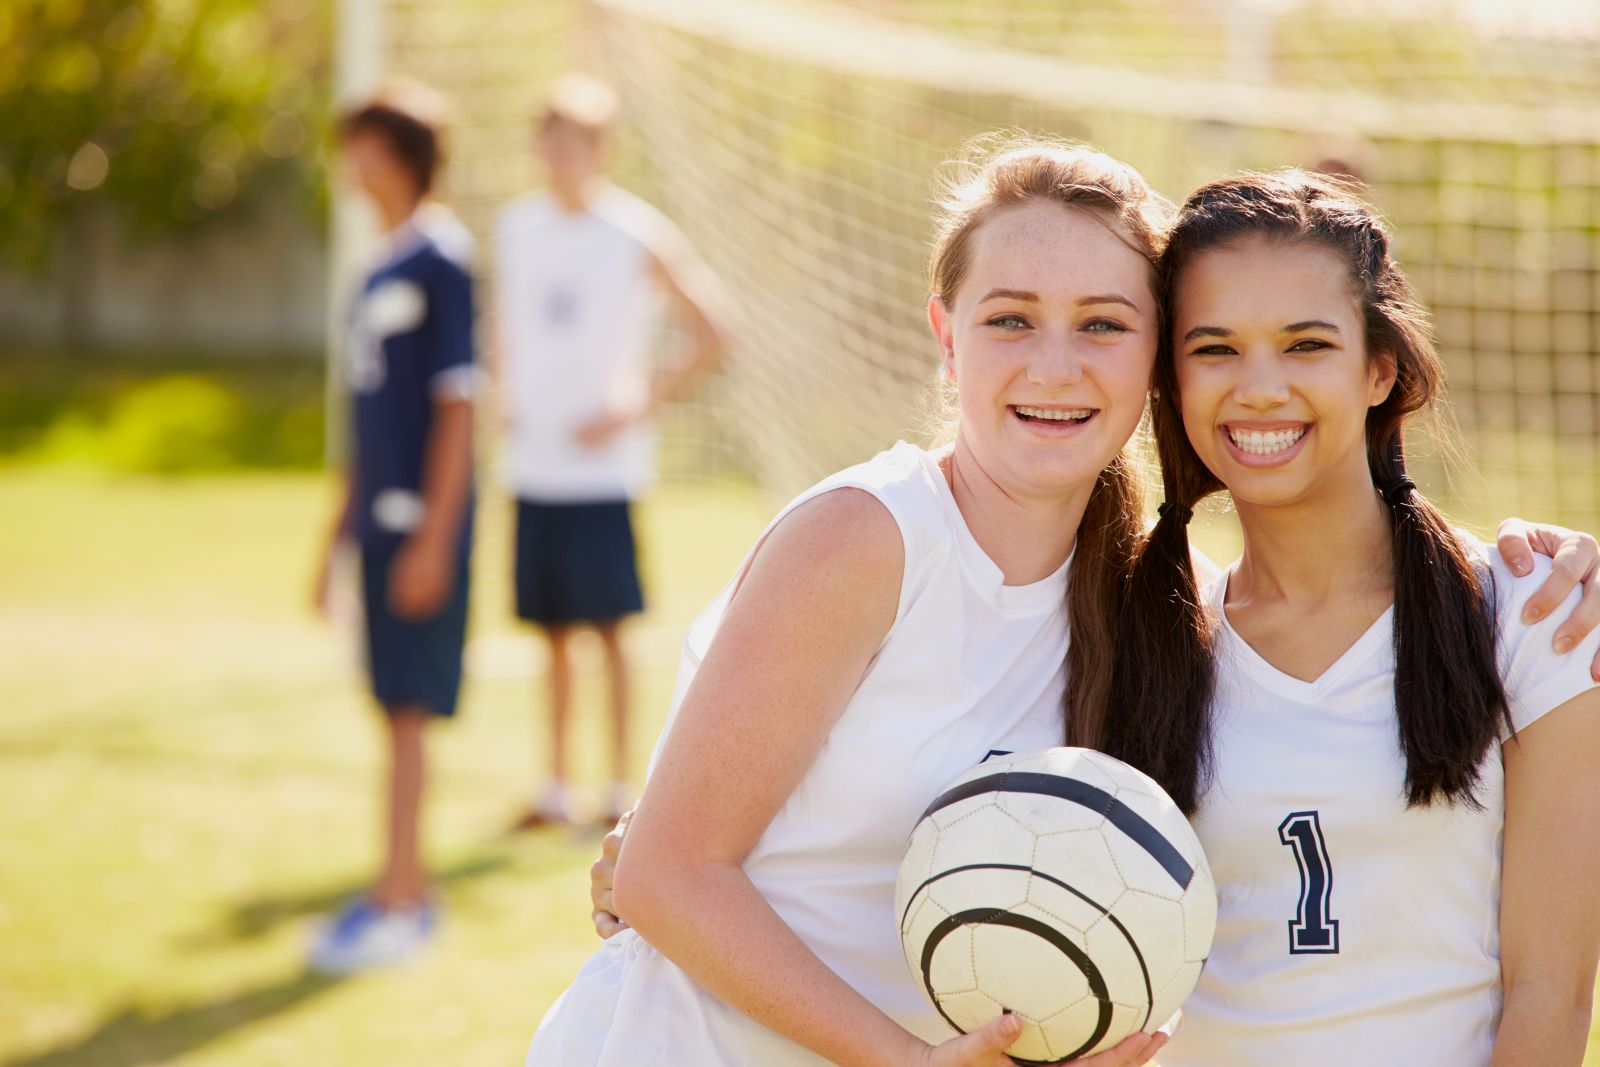 Two teenage girls smile for the camera while playing soccer